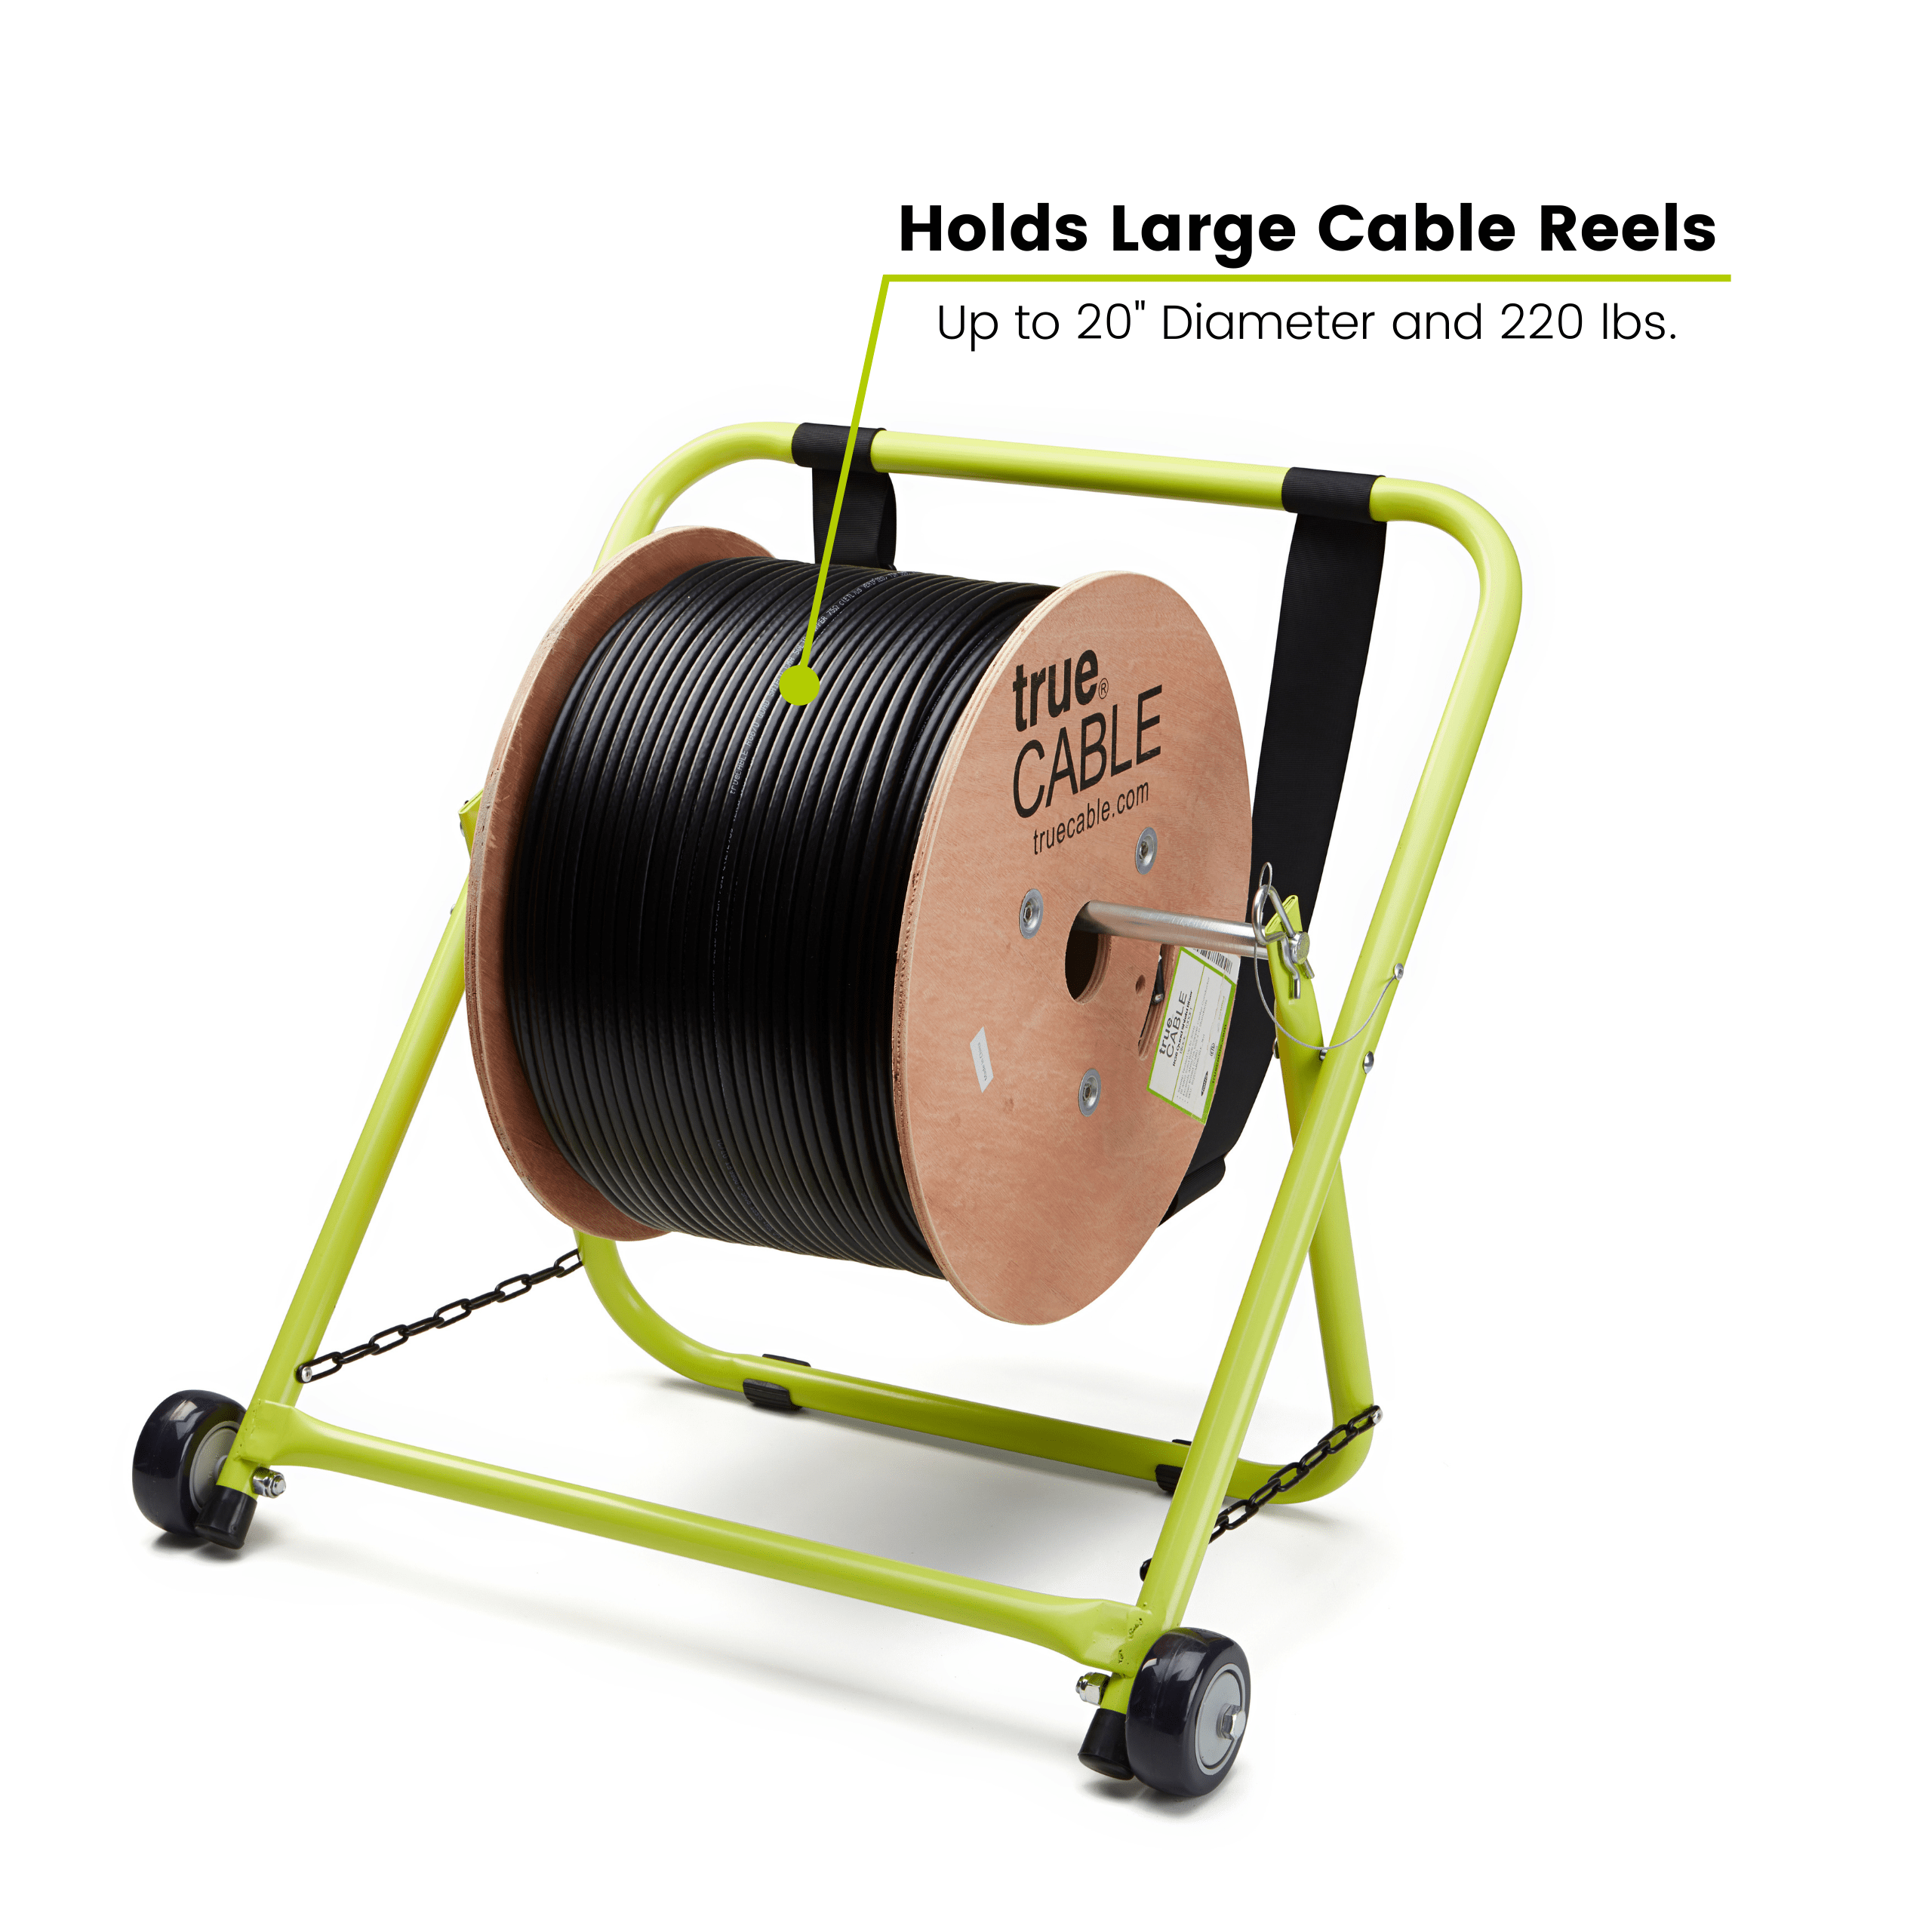 CABLE CADDY - CABLE REEL STAND - HOLDS CABLE SPOOLS up to 20